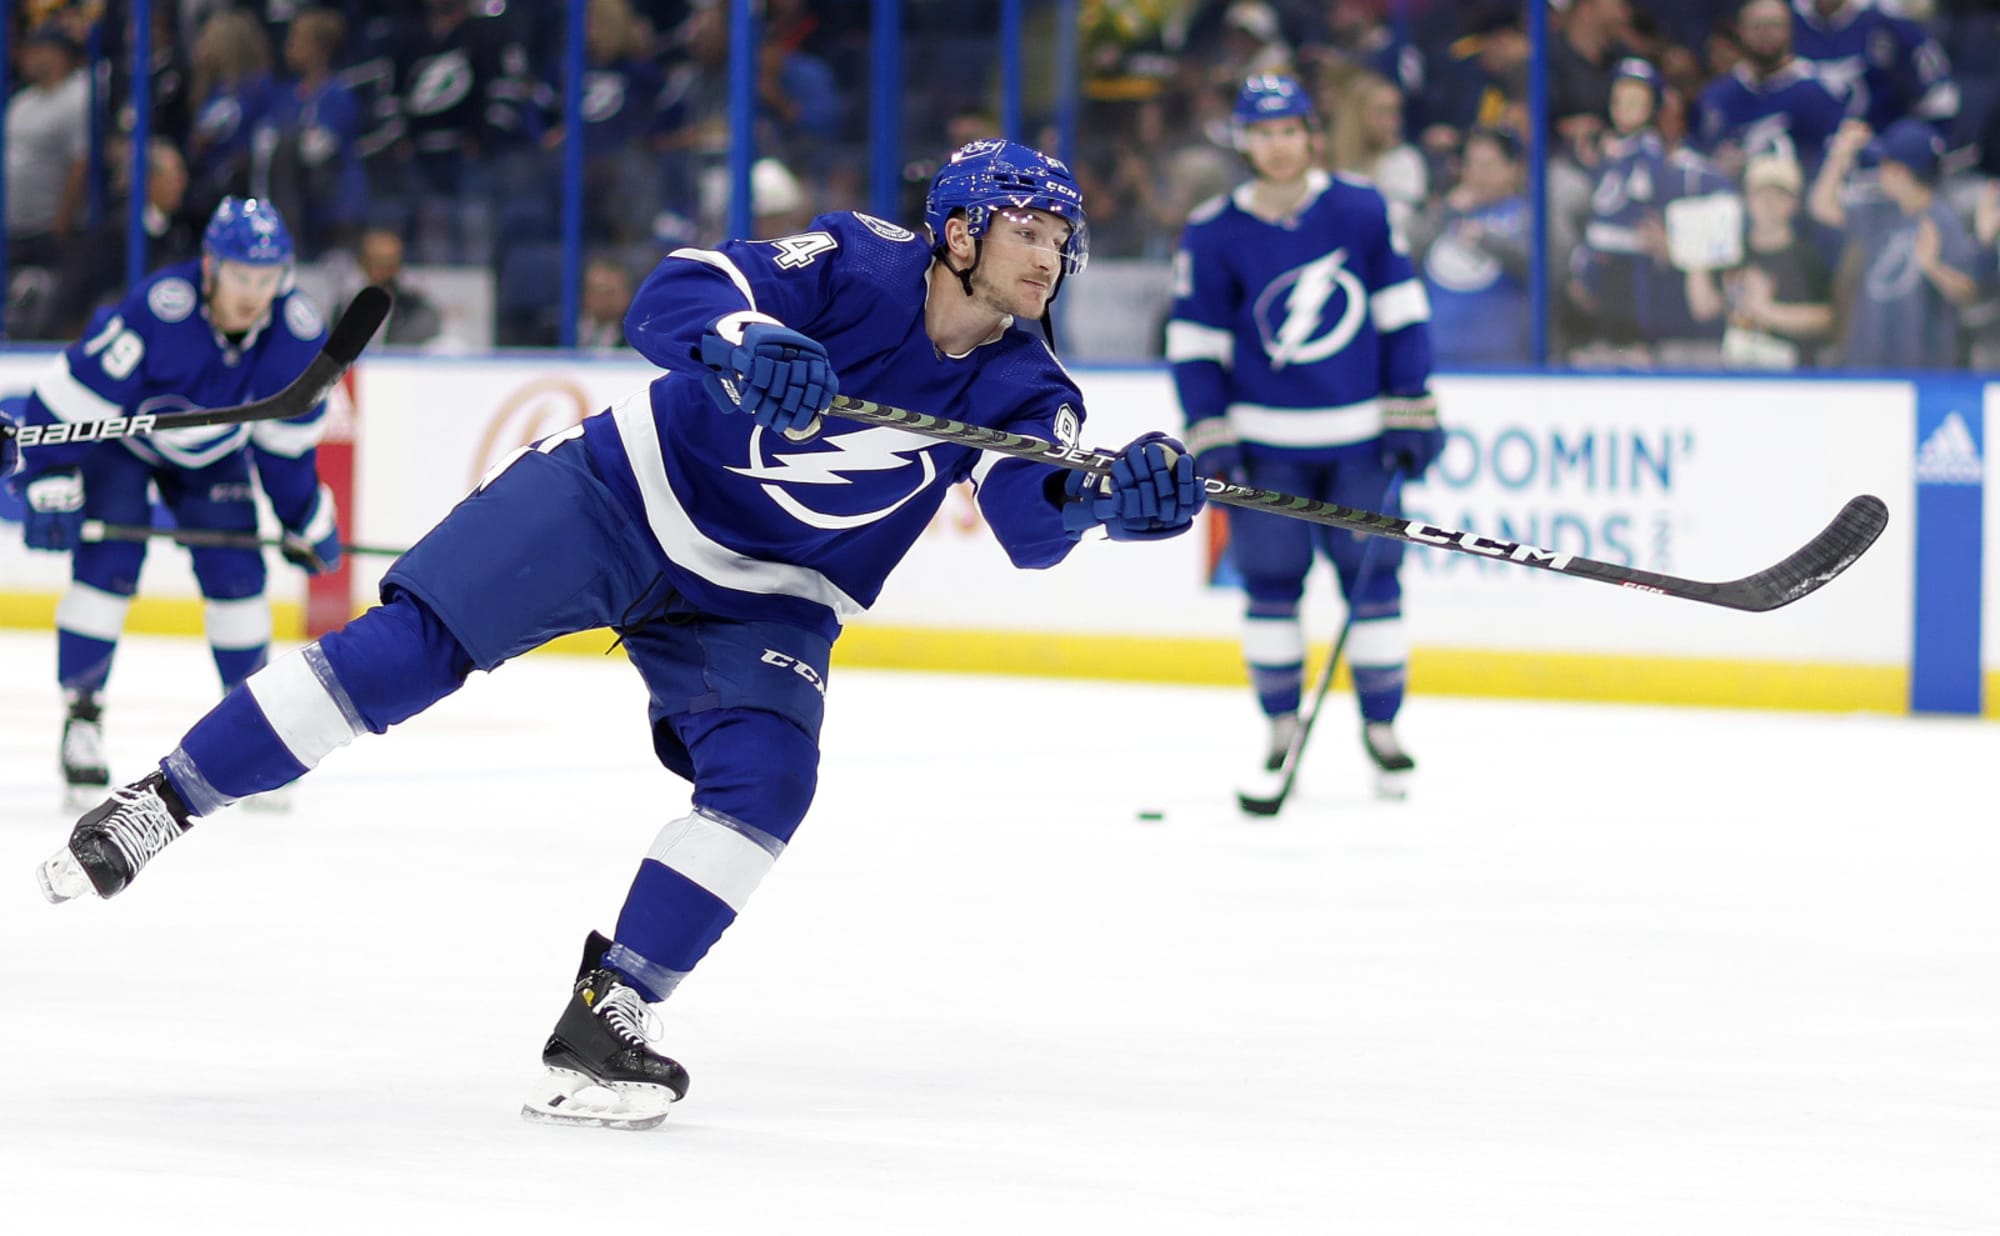 Jeannot Arbitration: Analysis and Tampa Bay Lightning's